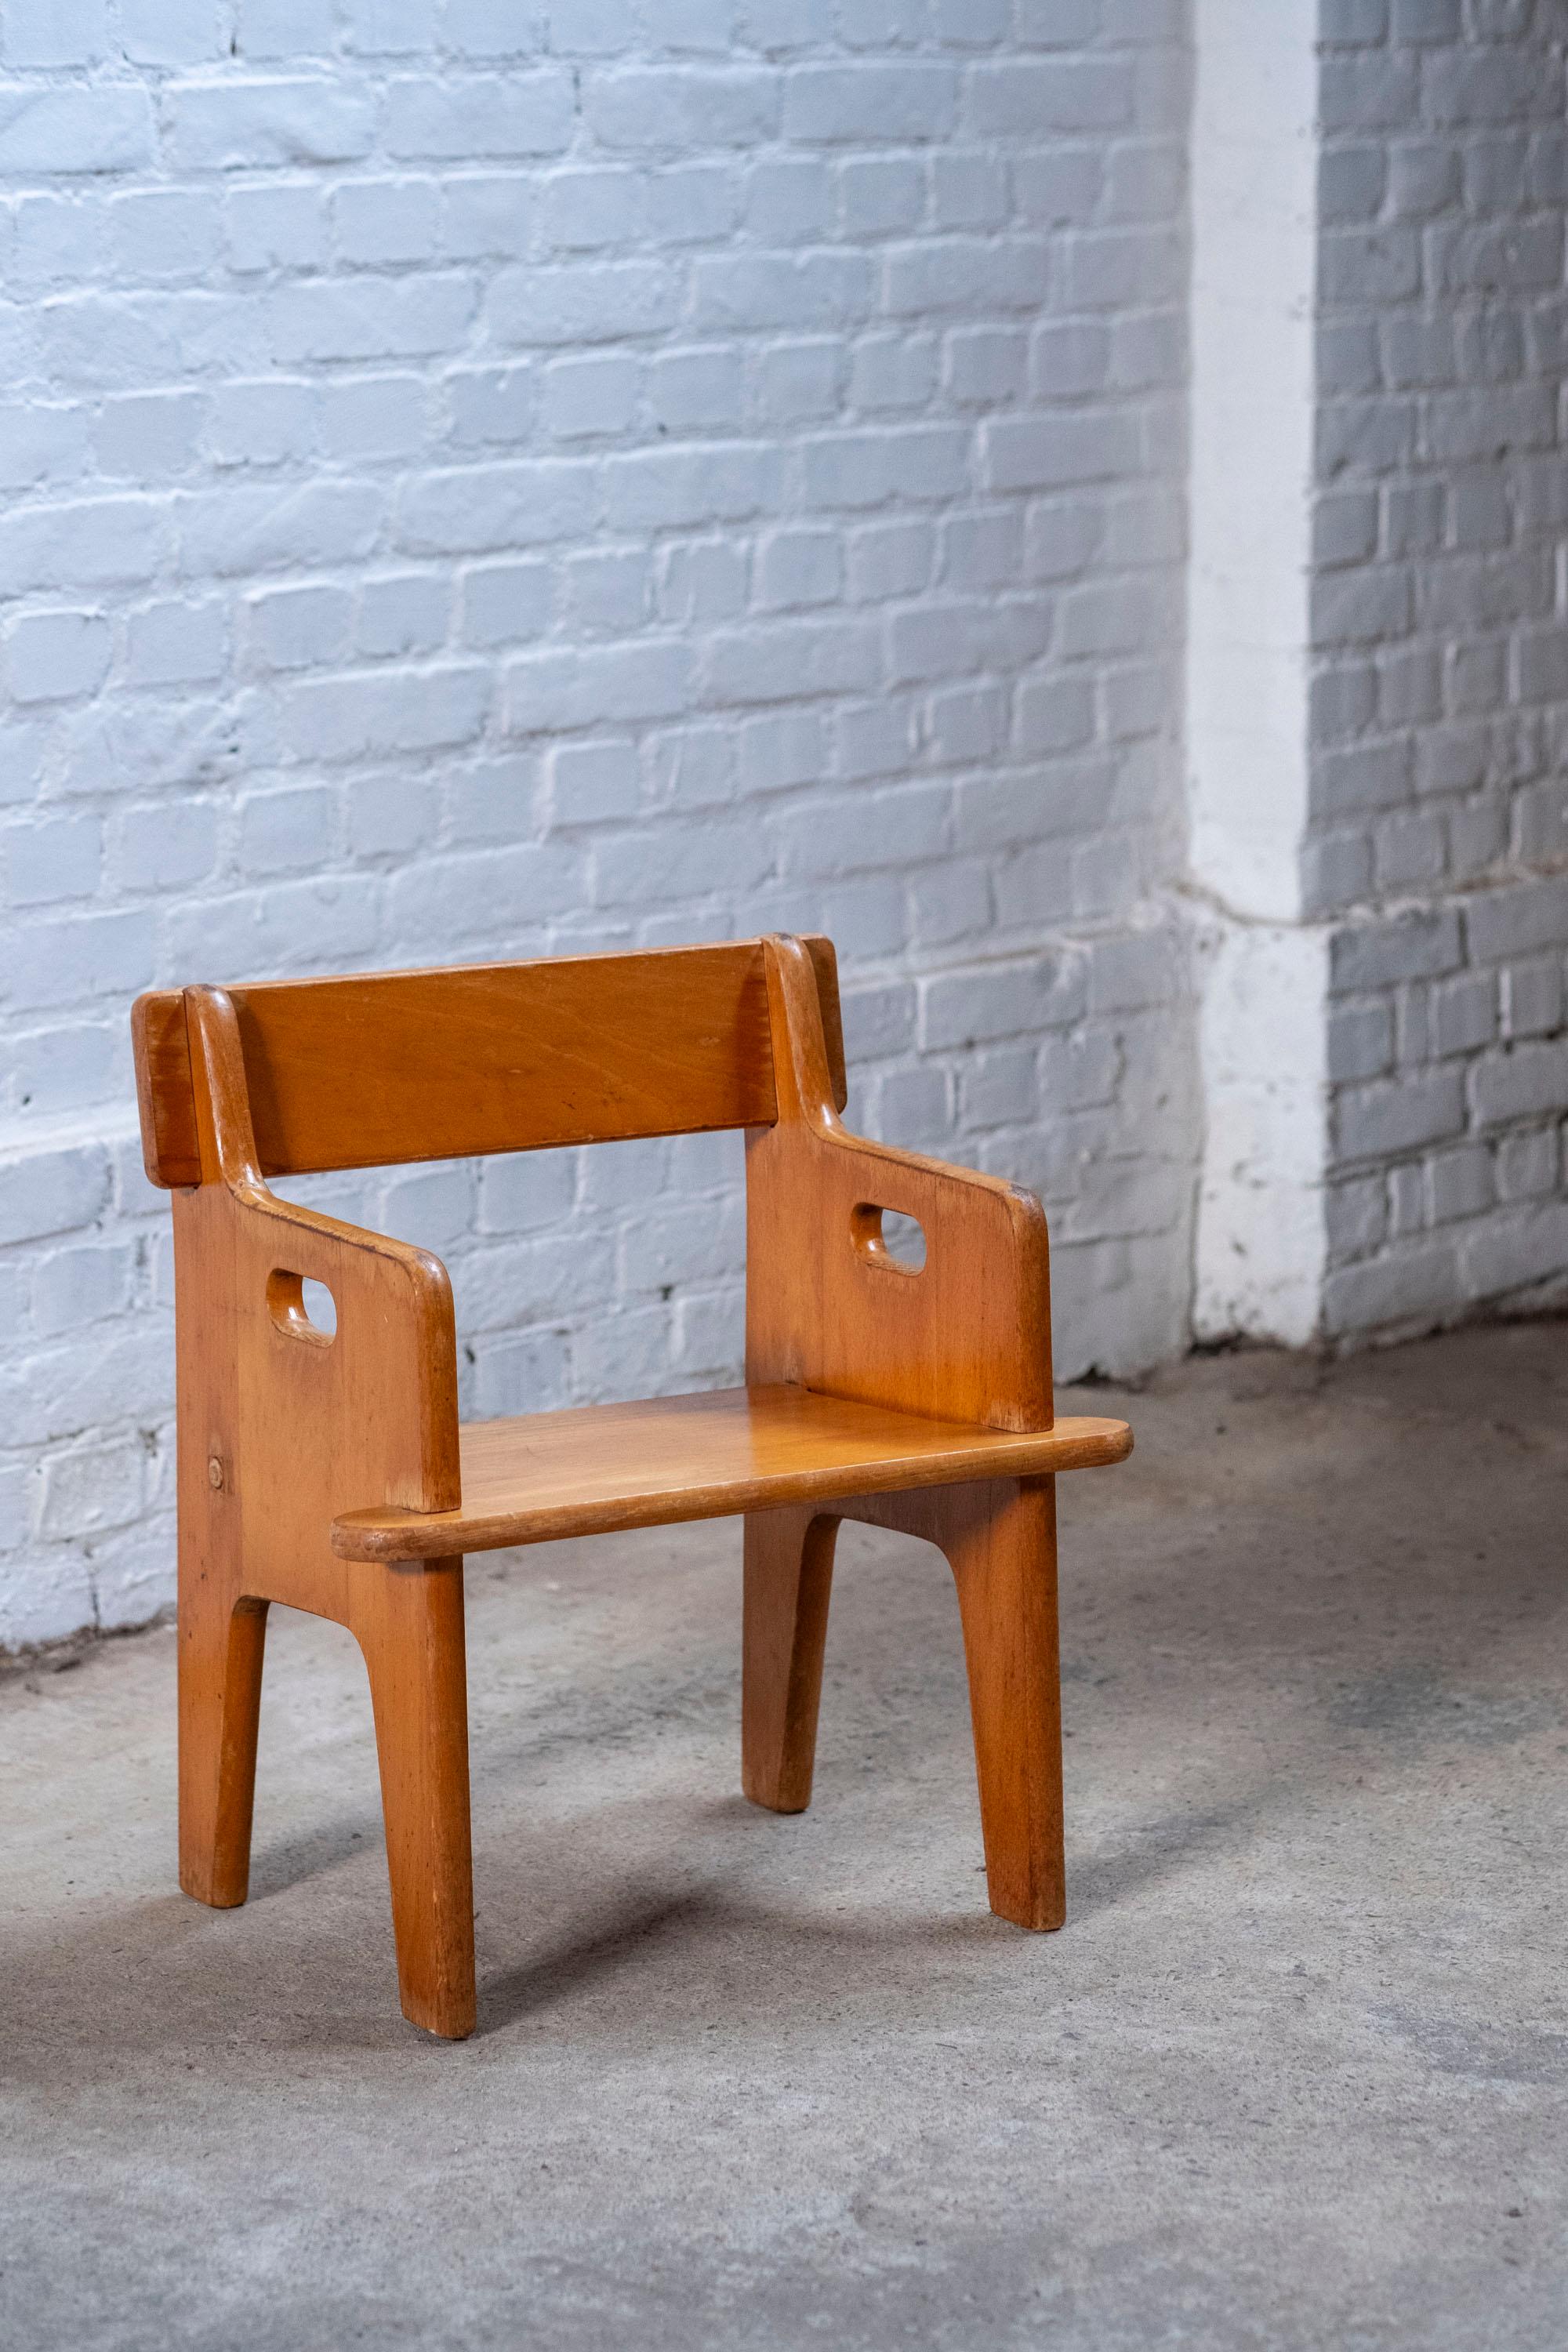 Early Peter's chair by Hans J. Wegner made by cabinetmaker Carl Marius Madsen for FDB Møbler in the late 1940s.

Peter's chair was designed and first made in 1944, during World War II, by Hans Jørgensen Wegner. Hans J. Wegner was the godfather to